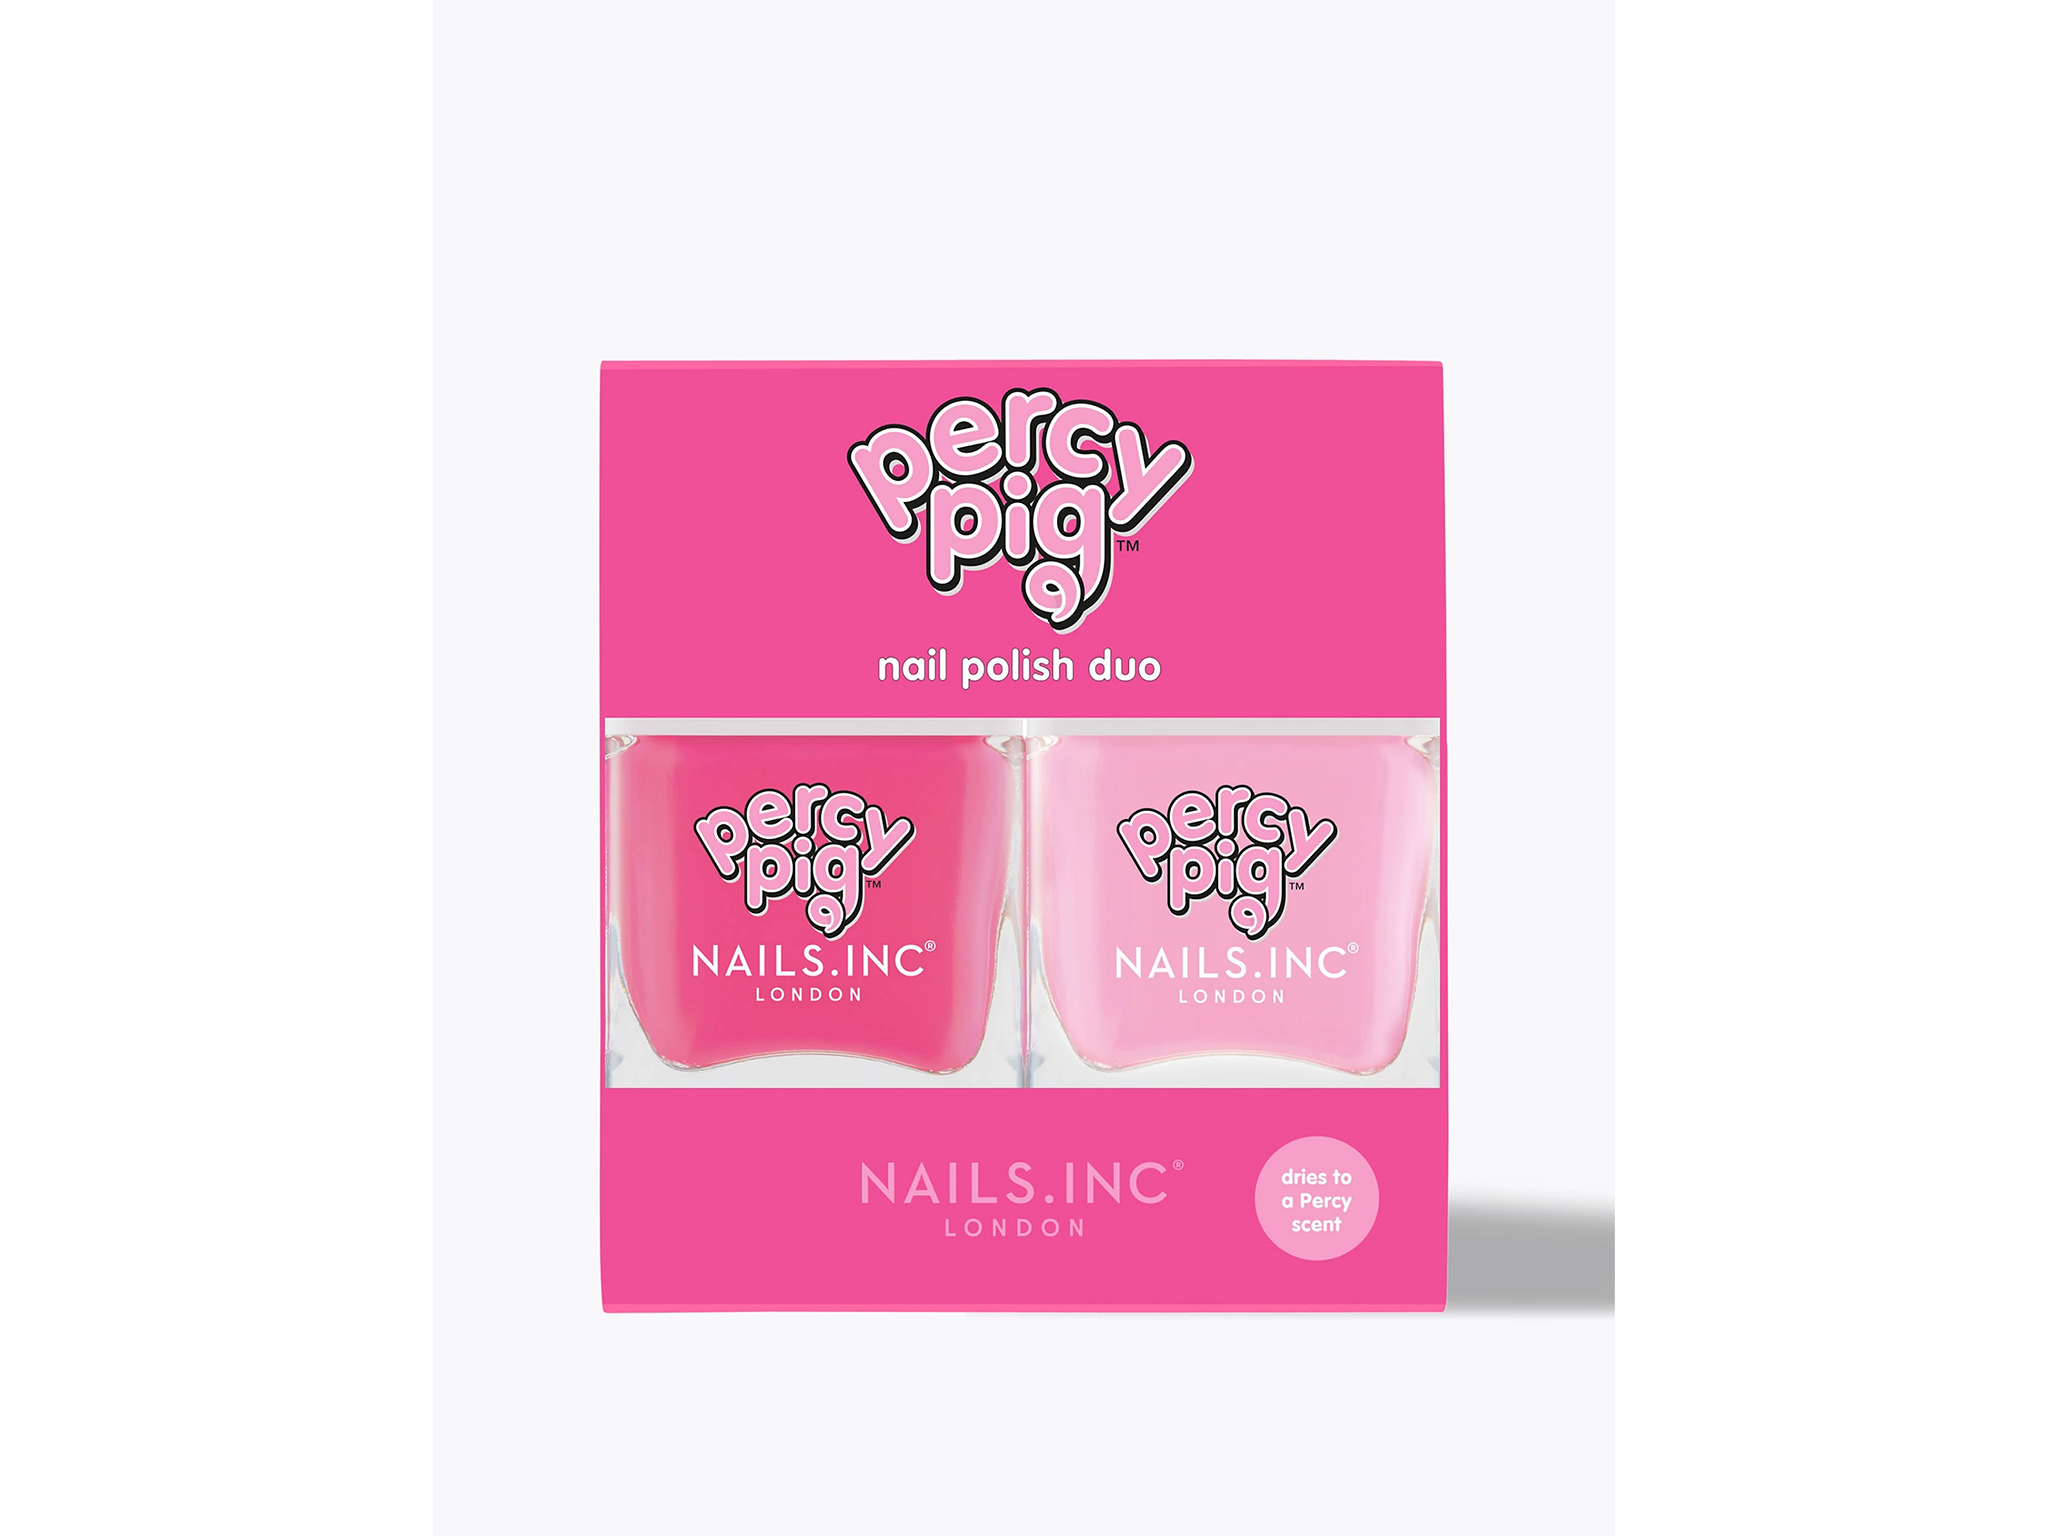 Nails.inc Percy Pigs scented nail polish duo